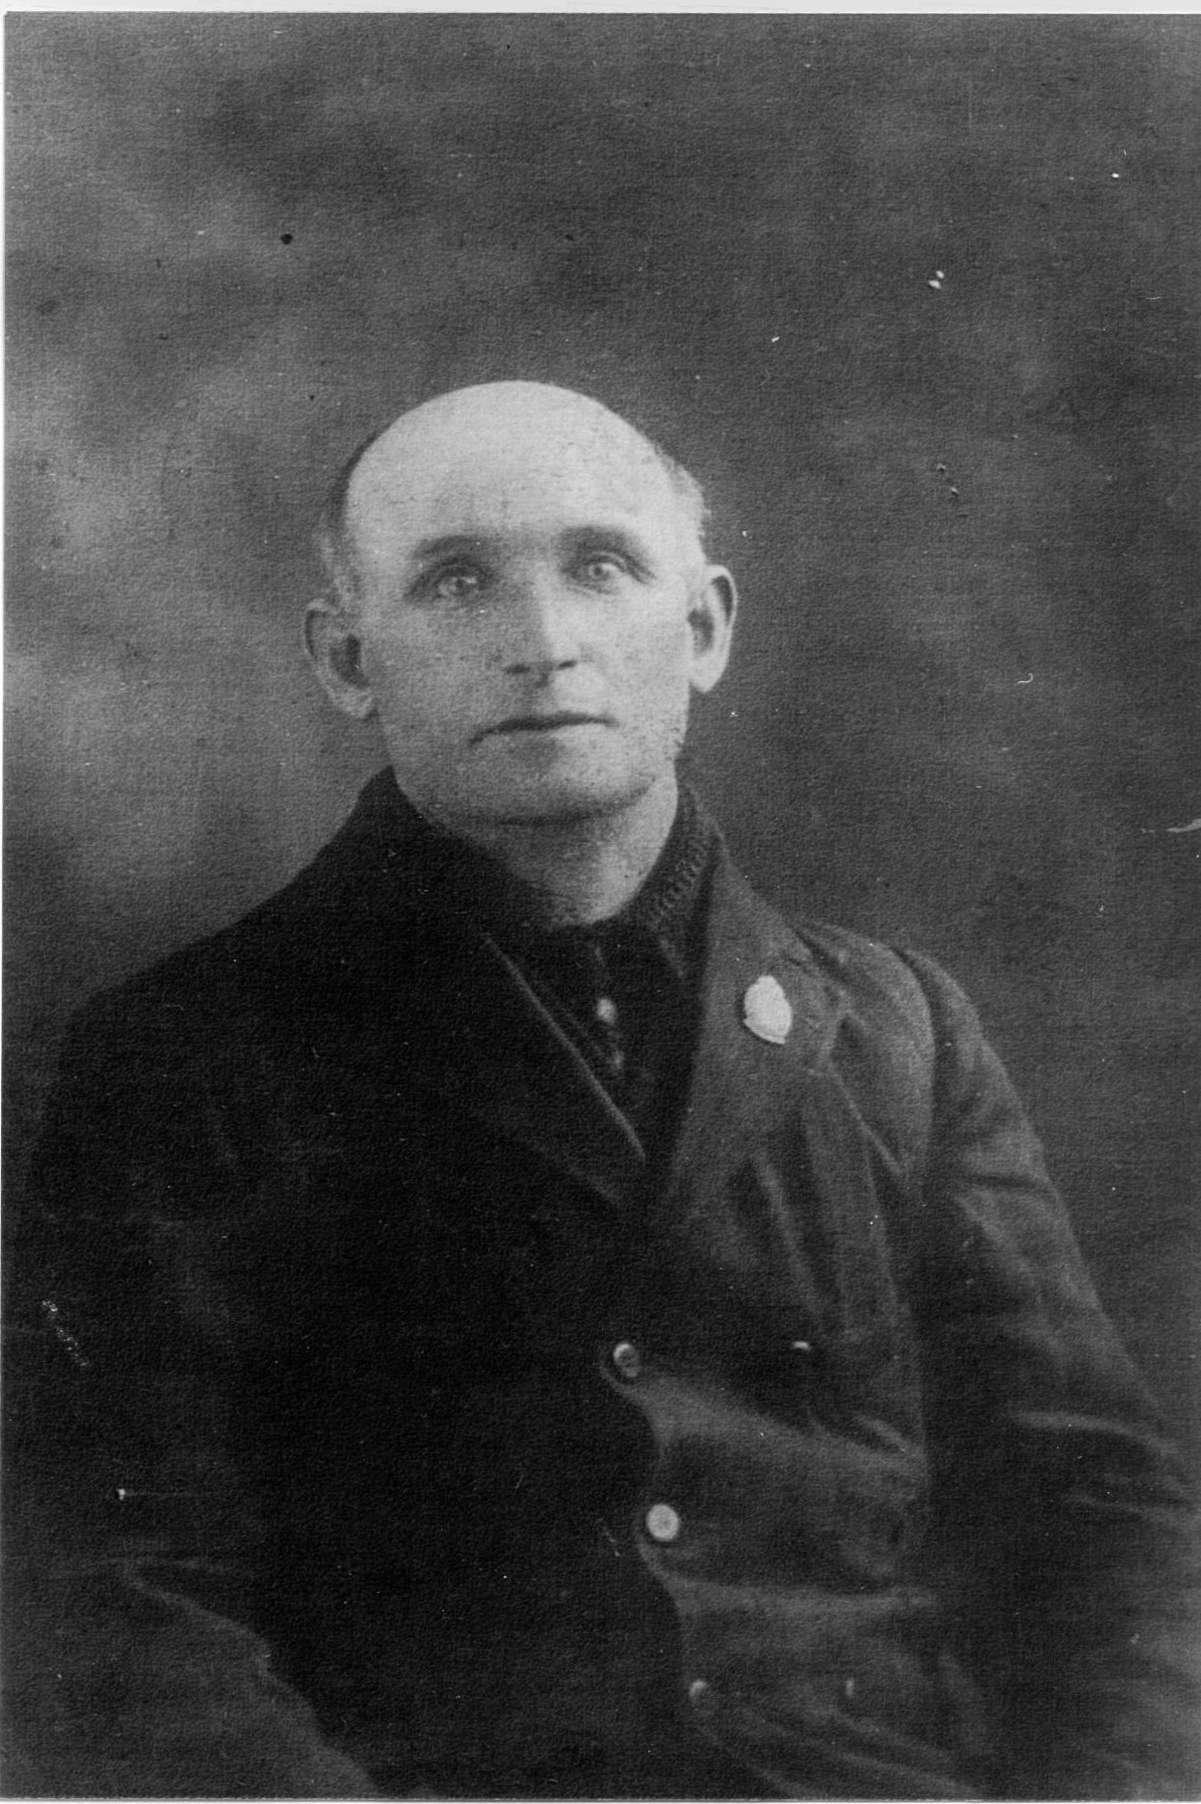 Black and white photograph of a balding man wearing an overcoat.